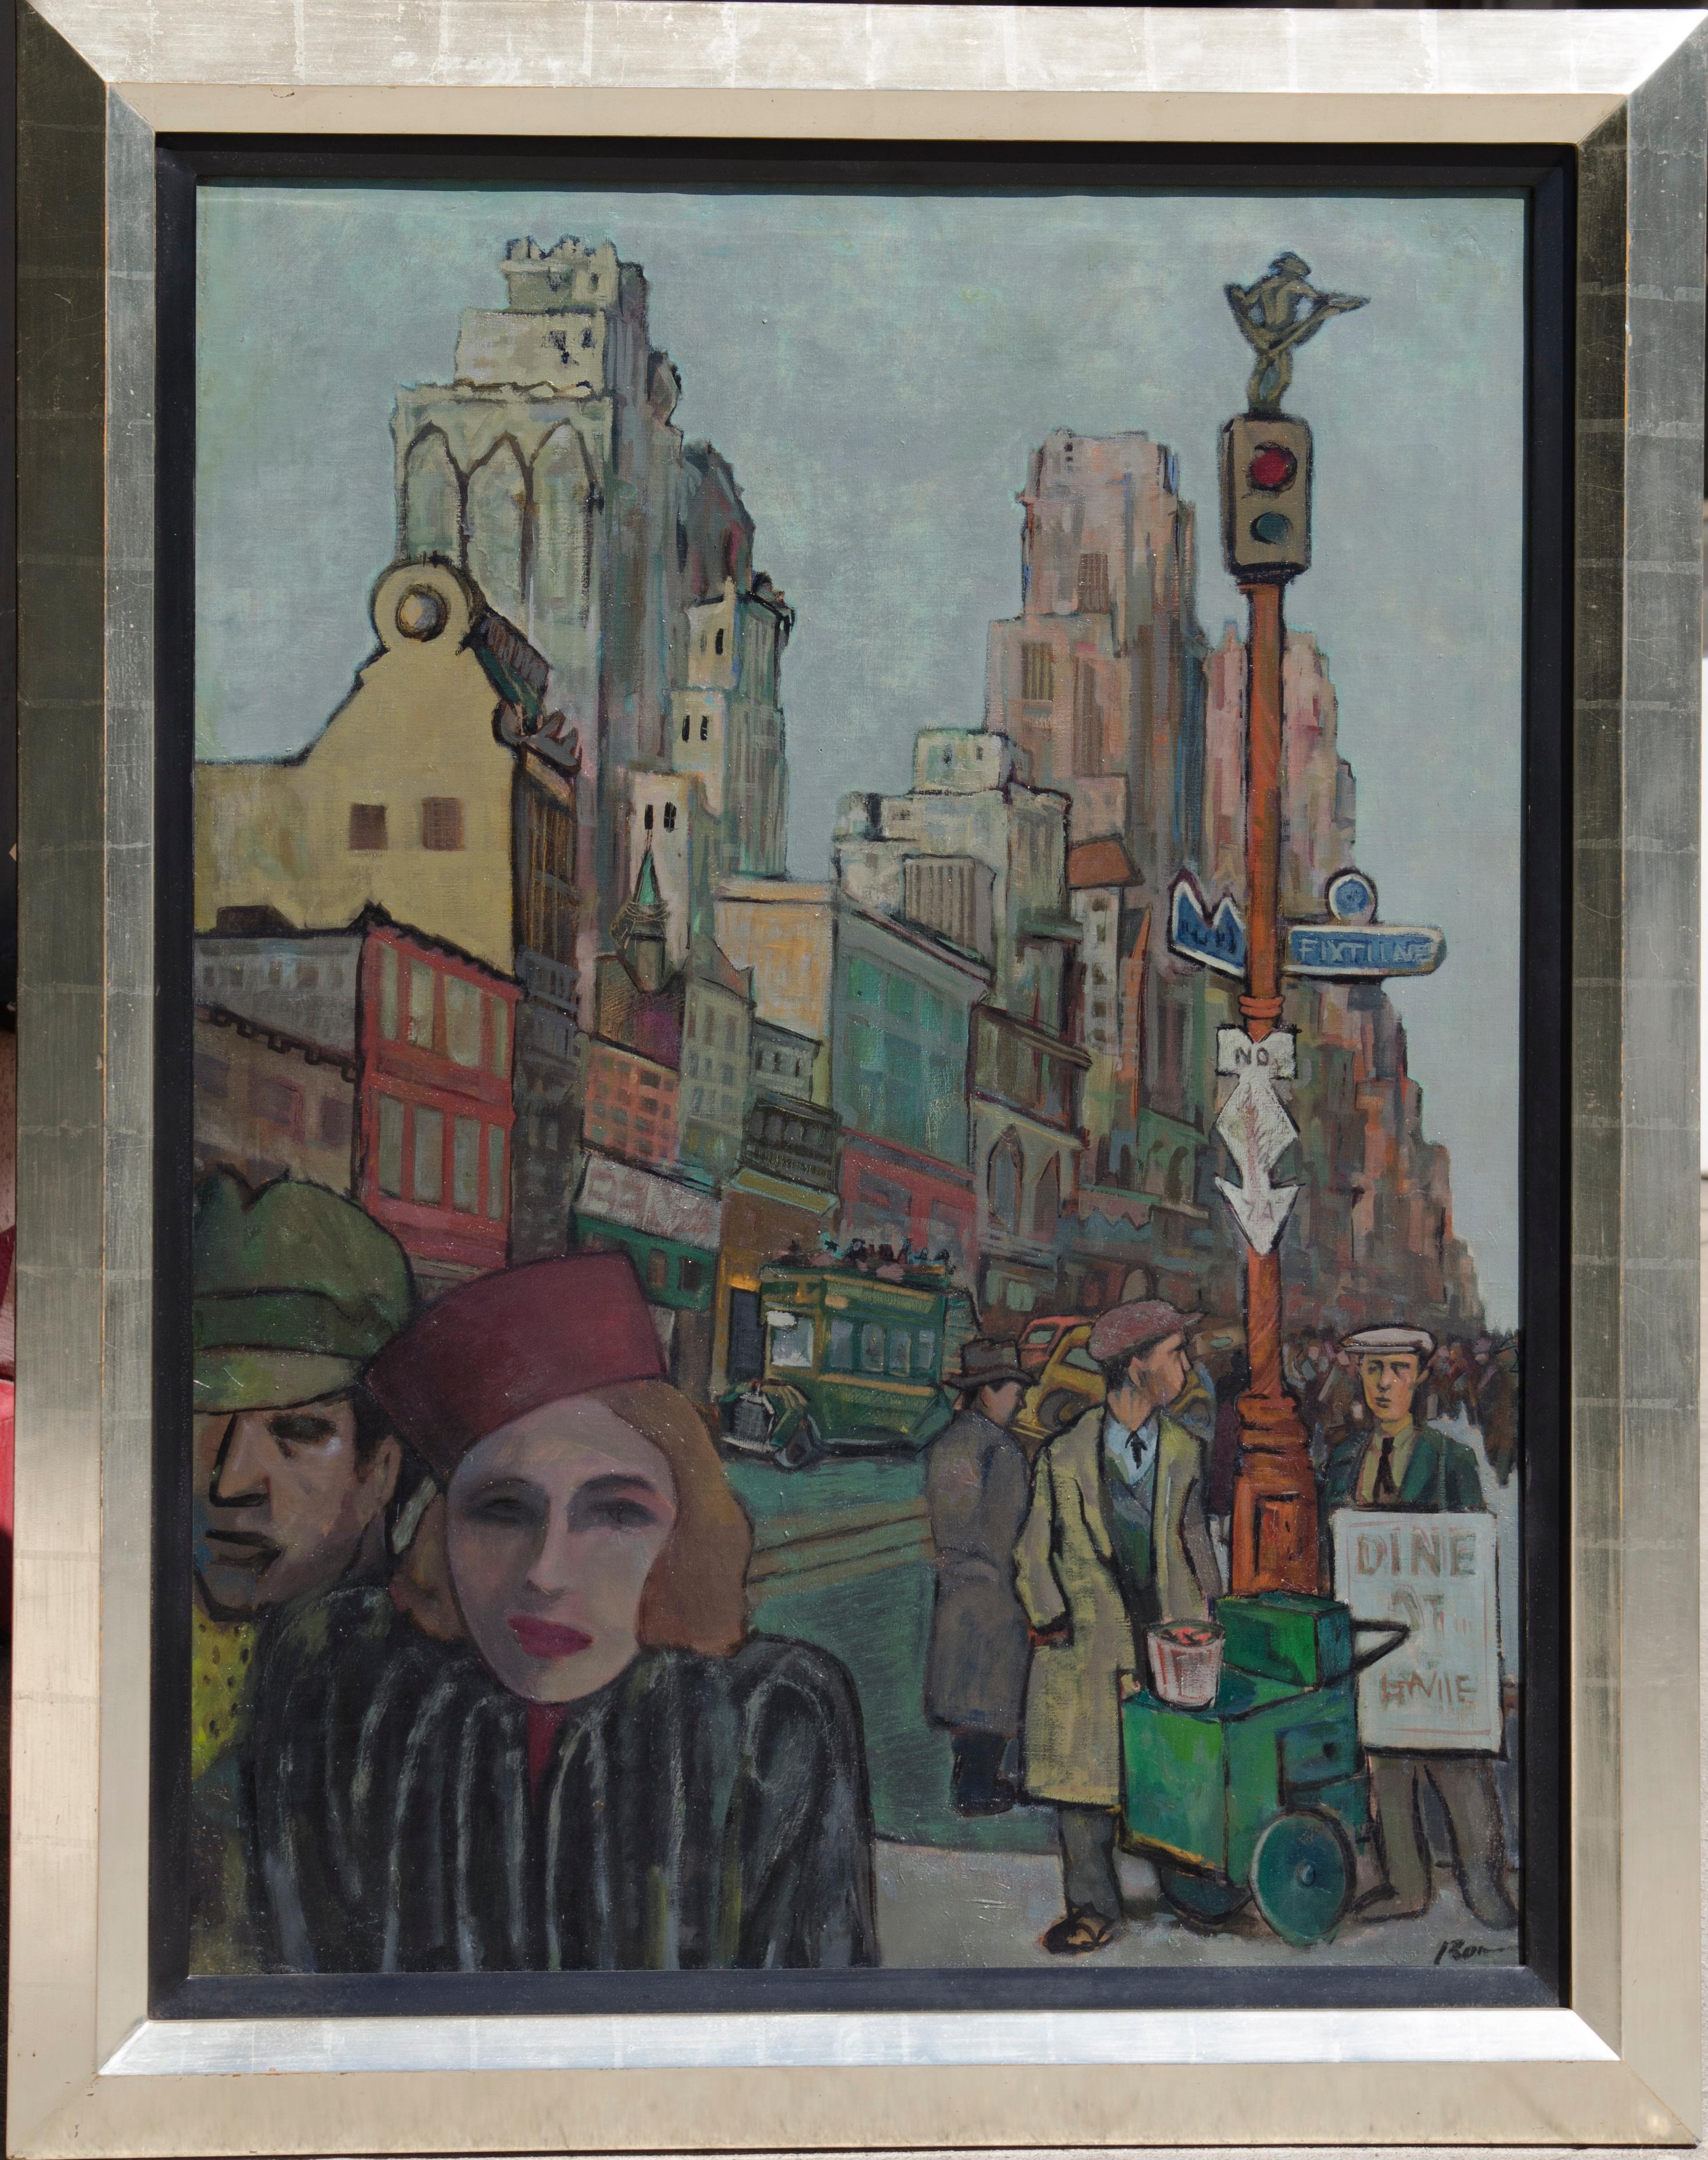 City Street: Fifth Avenue - Painting by Ron Blumberg